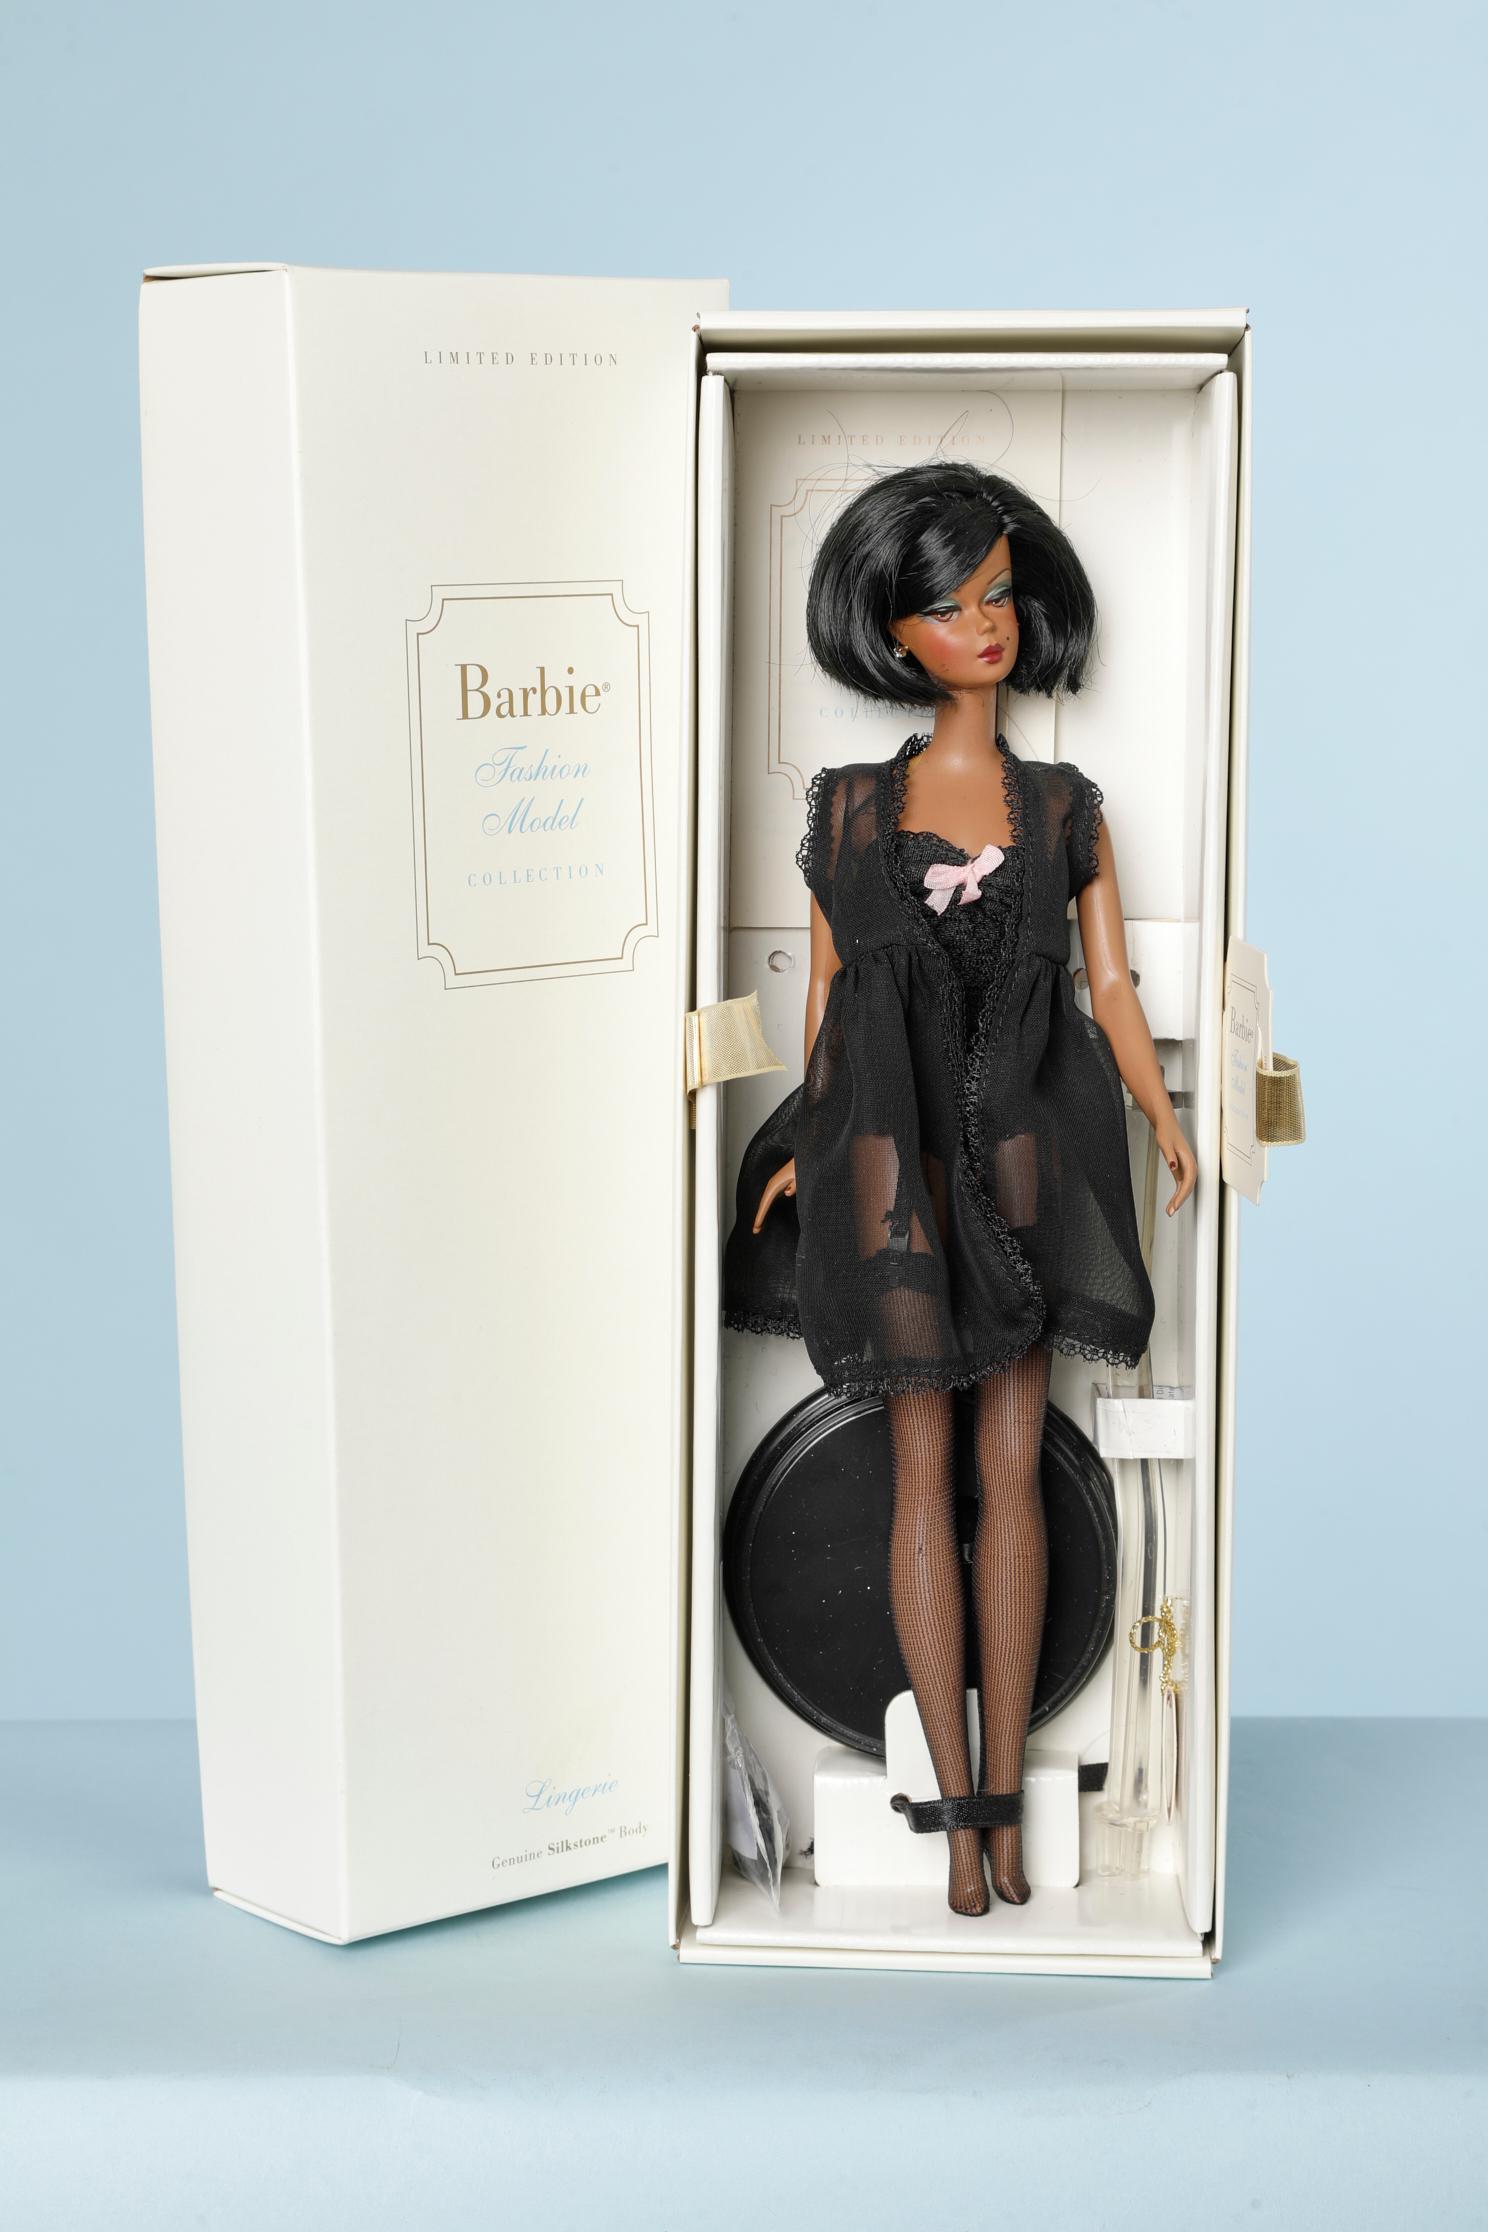 Barbie Fashion Model / Lingerie/ Limited Edition.
Certificate of authenticity. 